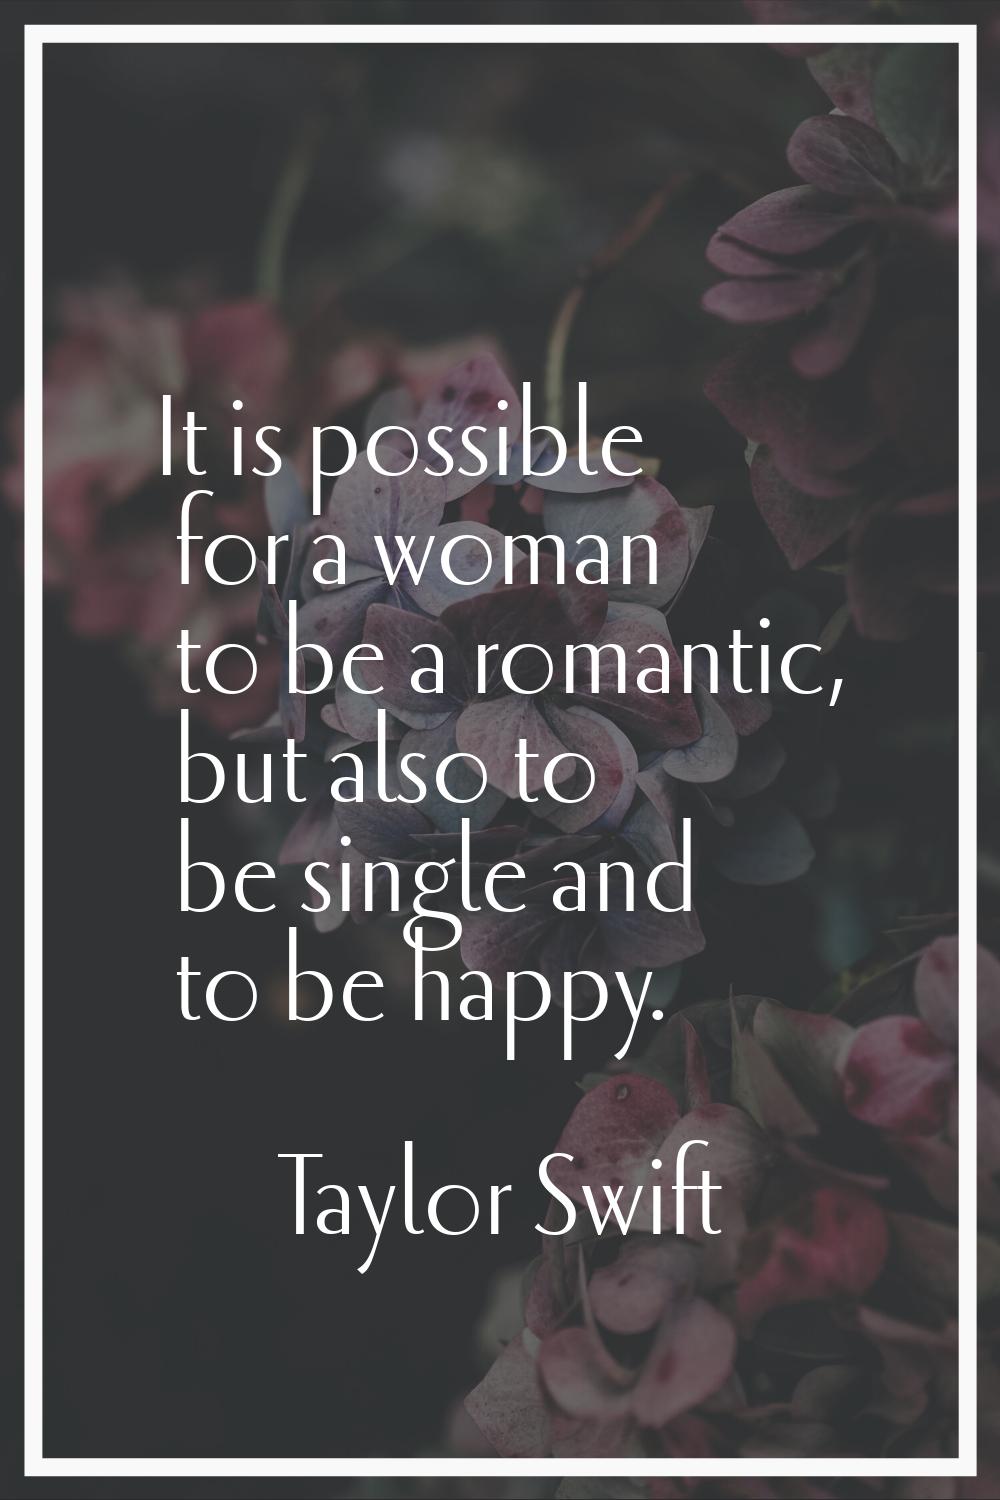 It is possible for a woman to be a romantic, but also to be single and to be happy.